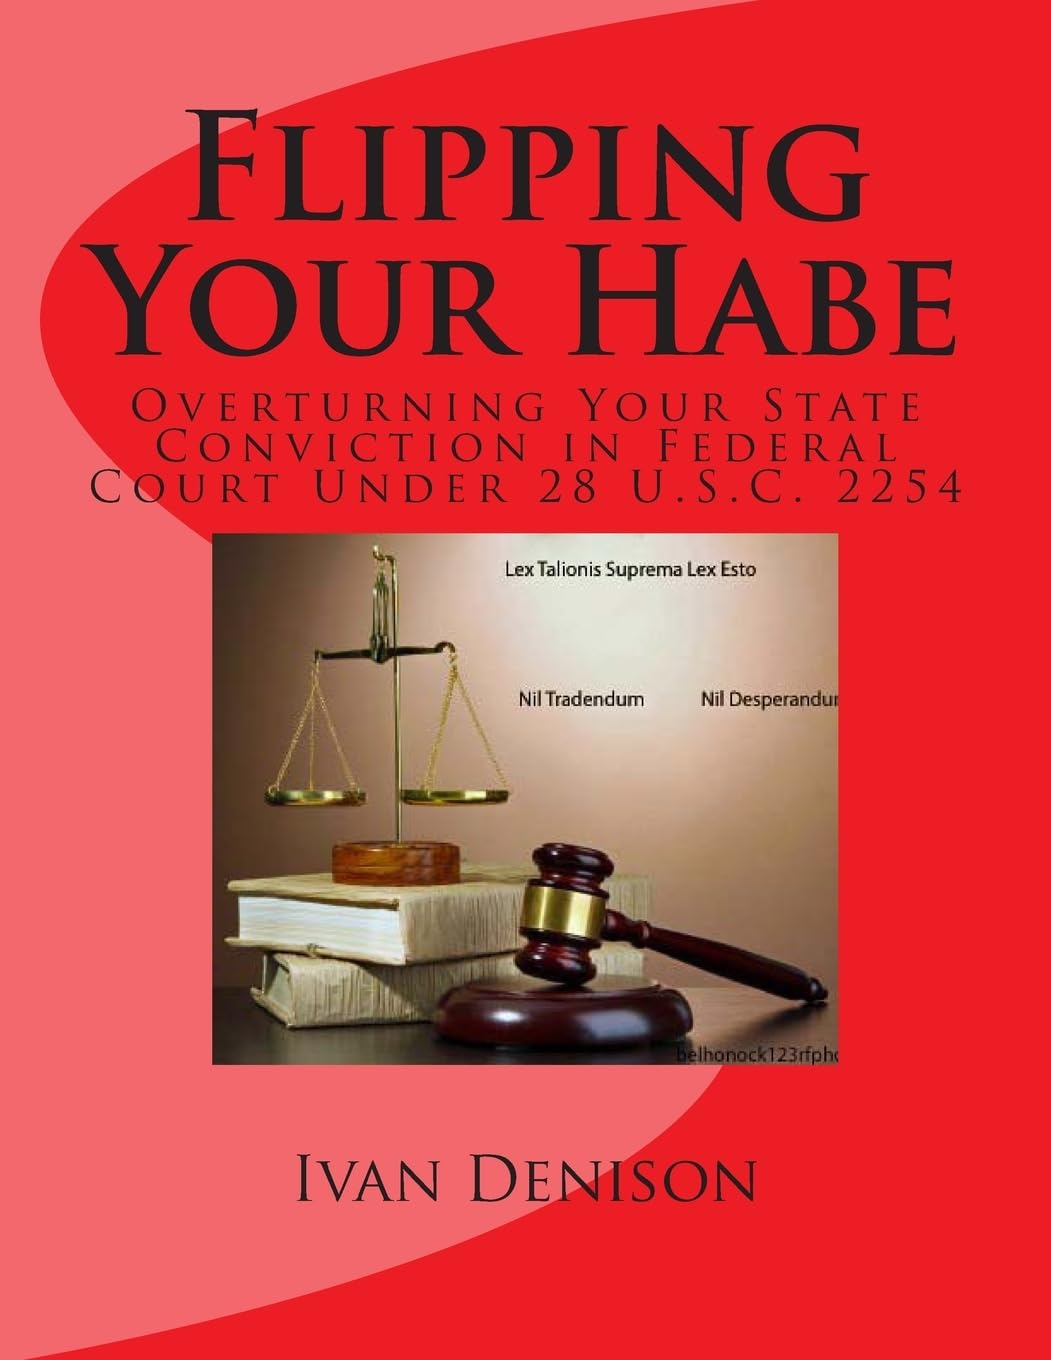 Flipping Your Habe - Overturning Your State Conviction in Federal Court Under 28 U.S.C. 2254 - CA Corrections Bookstore